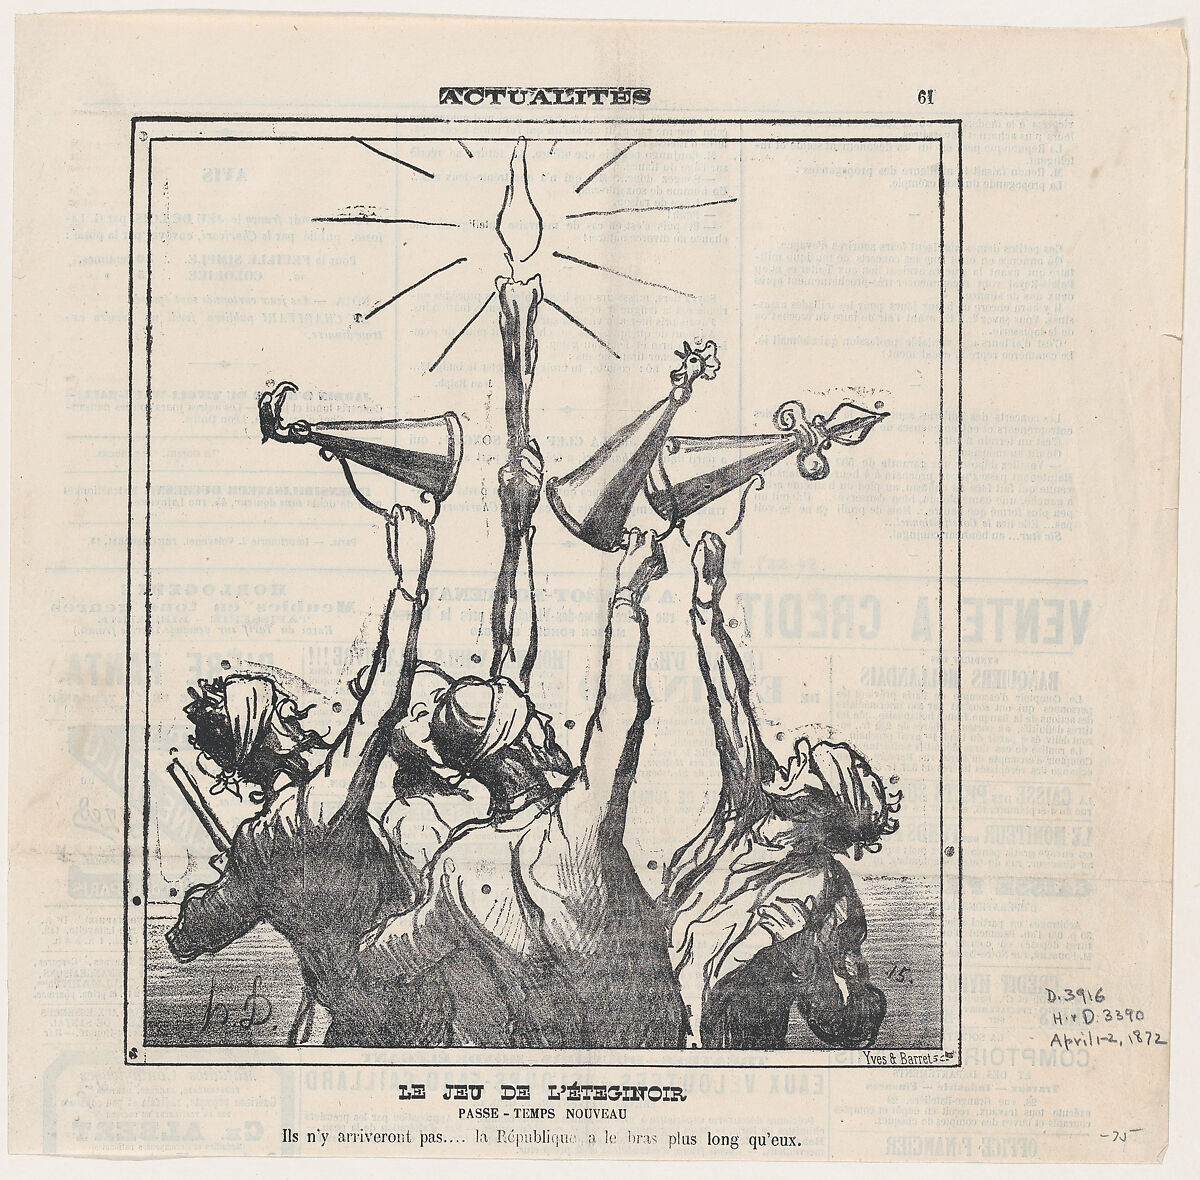 The game with the candle extinguisher, A new pastime: They won't be able to reach it .... the Republic's arms are longer than theirs, from 'News of the day,' published in Le Charivari, April 1-2, 1872, Honoré Daumier (French, Marseilles 1808–1879 Valmondois), Lithograph on newsprint; second state of two (Delteil) 